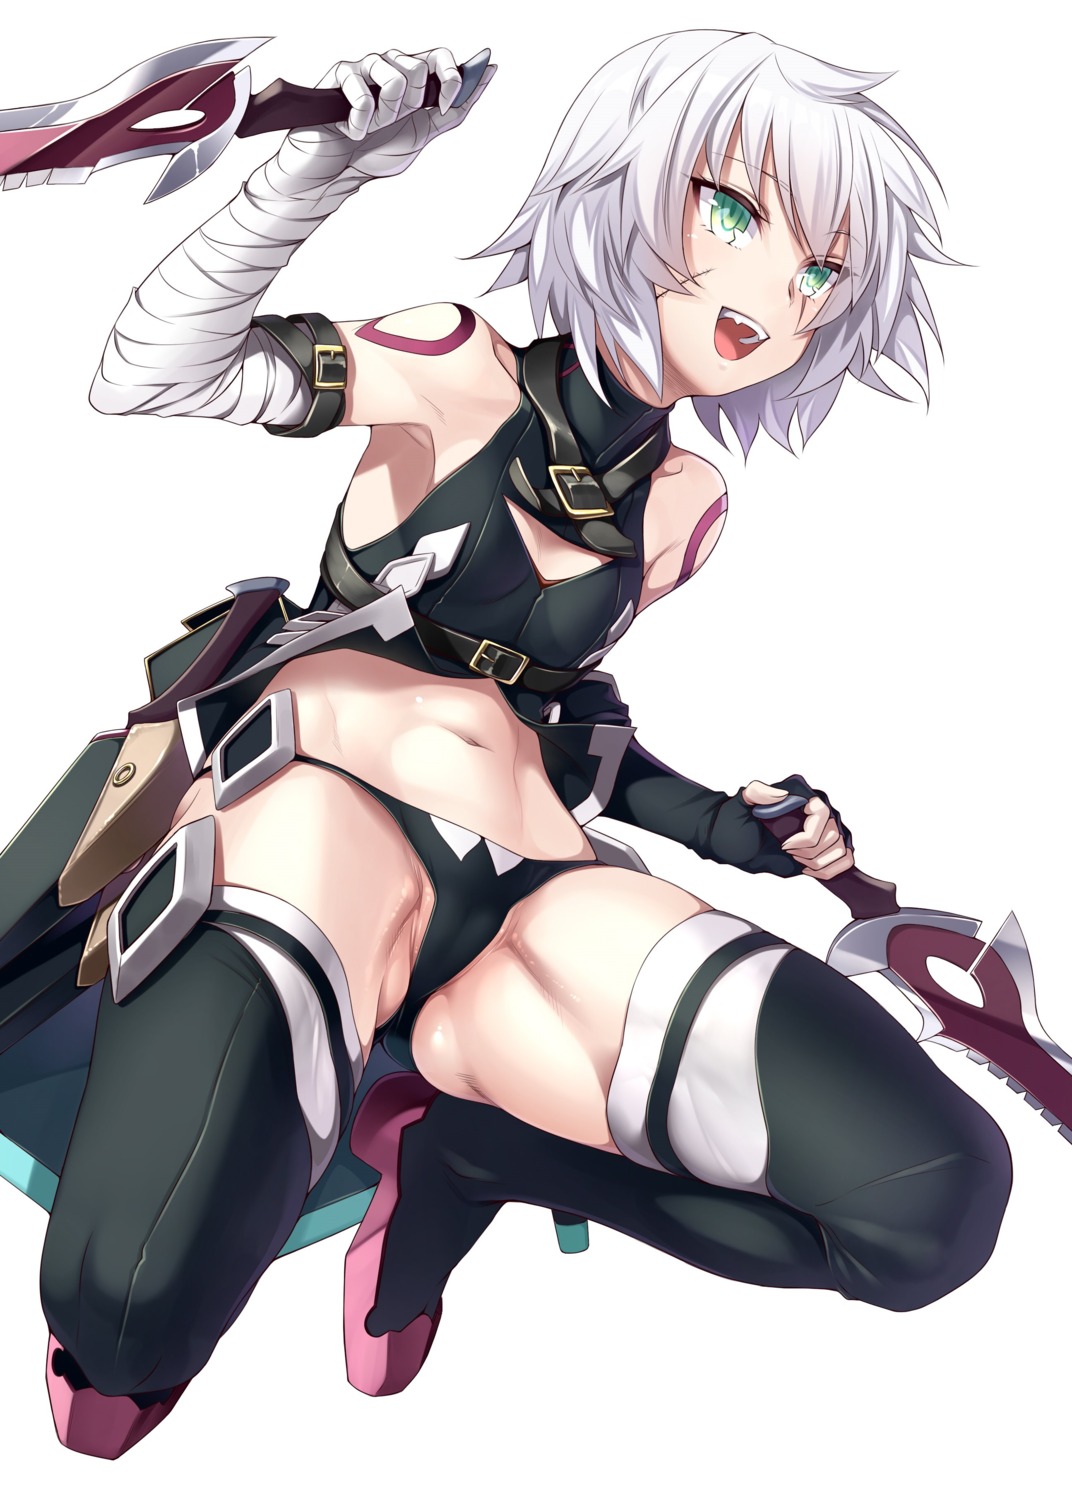 bandages cameltoe cleavage fate/grand_order heels jack_the_ripper orochi_itto pantsu thighhighs weapon